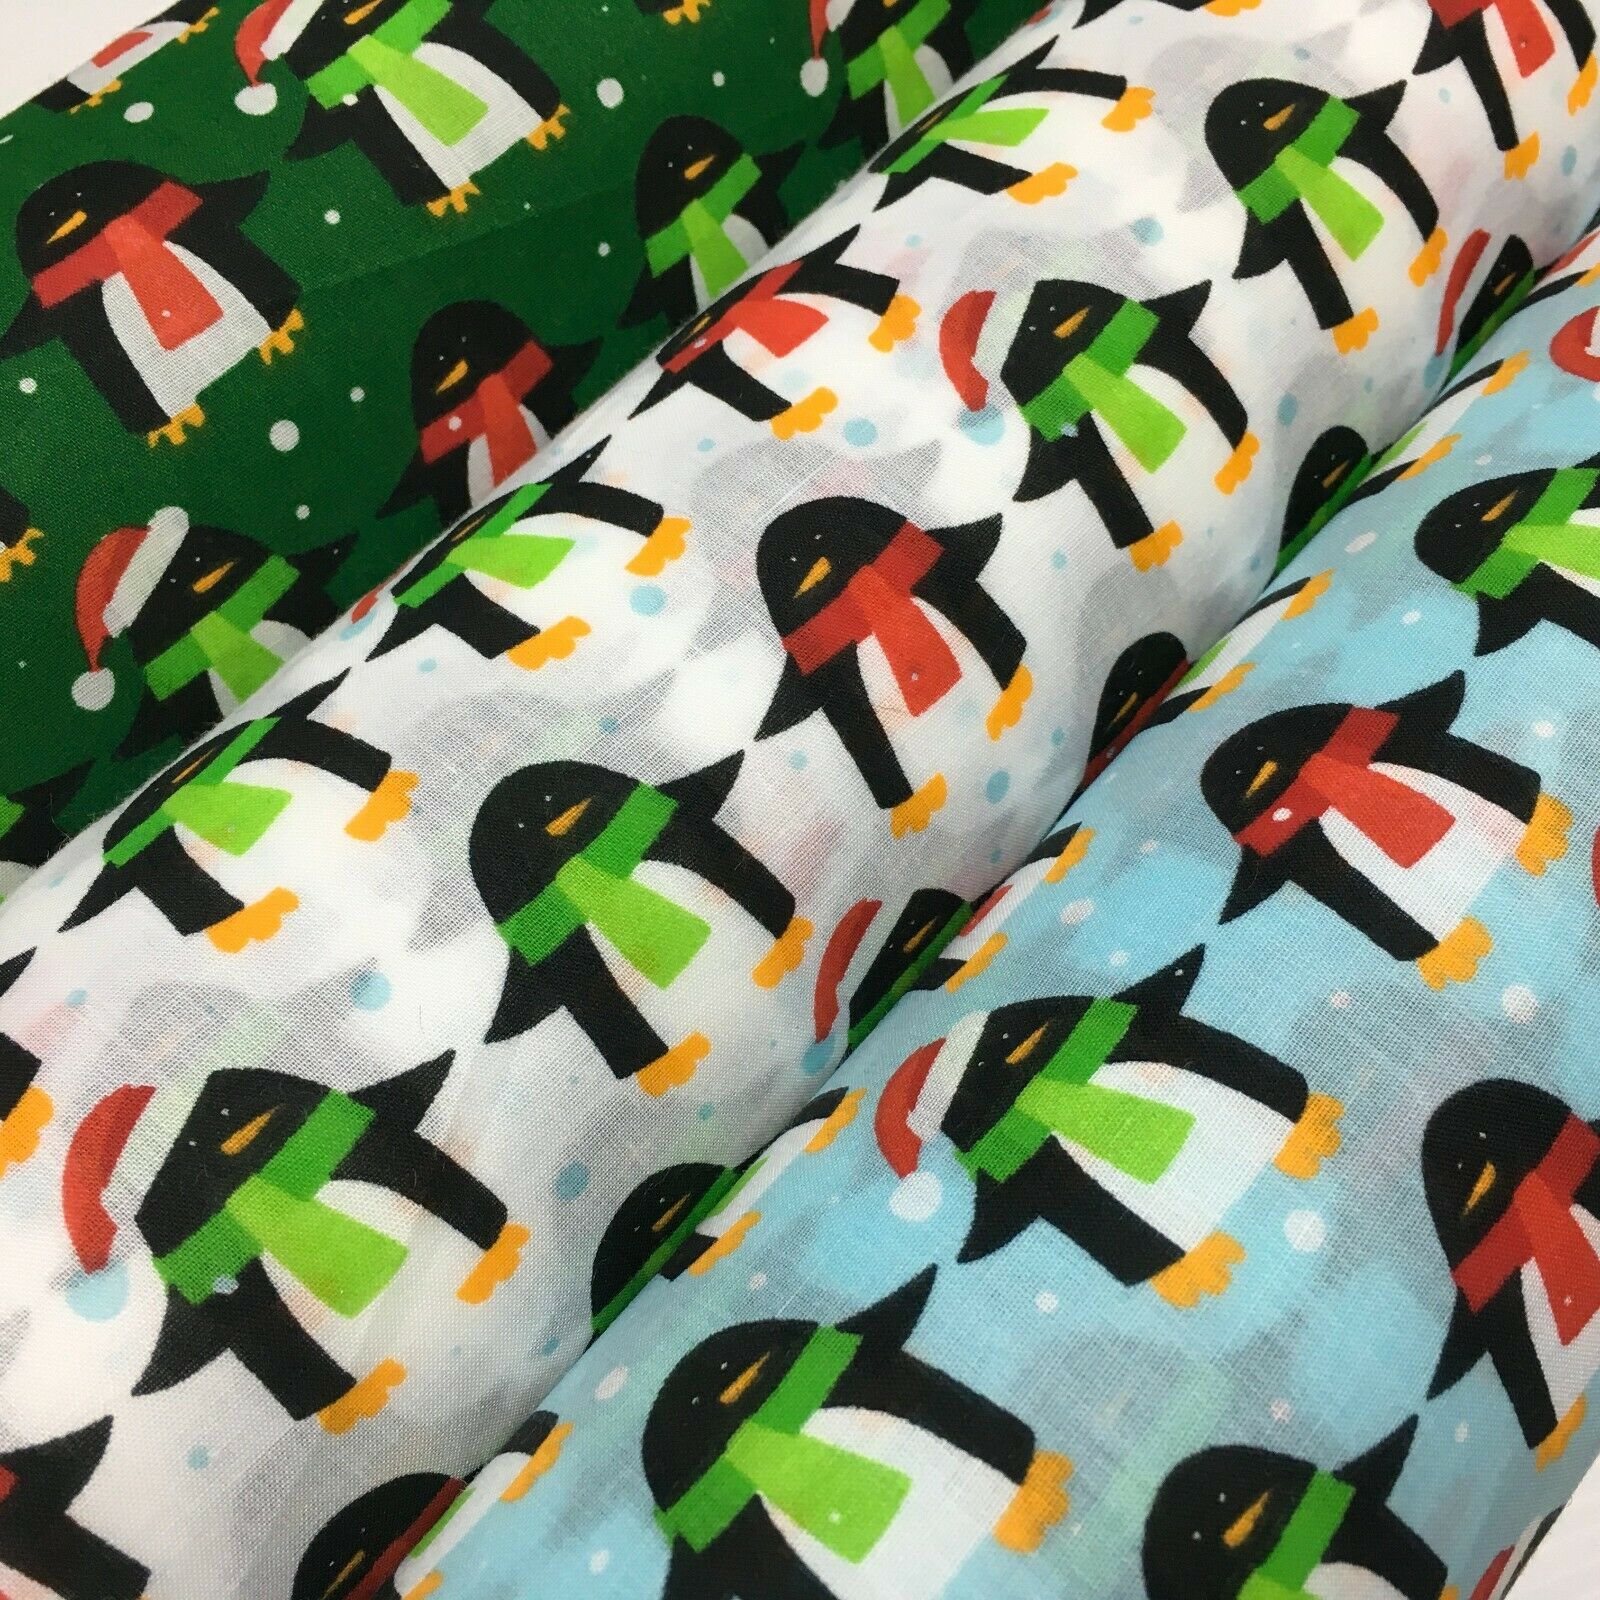 Christmas Penguin Xmas Printed cotton Fabric Craft Gifts 110 cm MD1289 Mtex